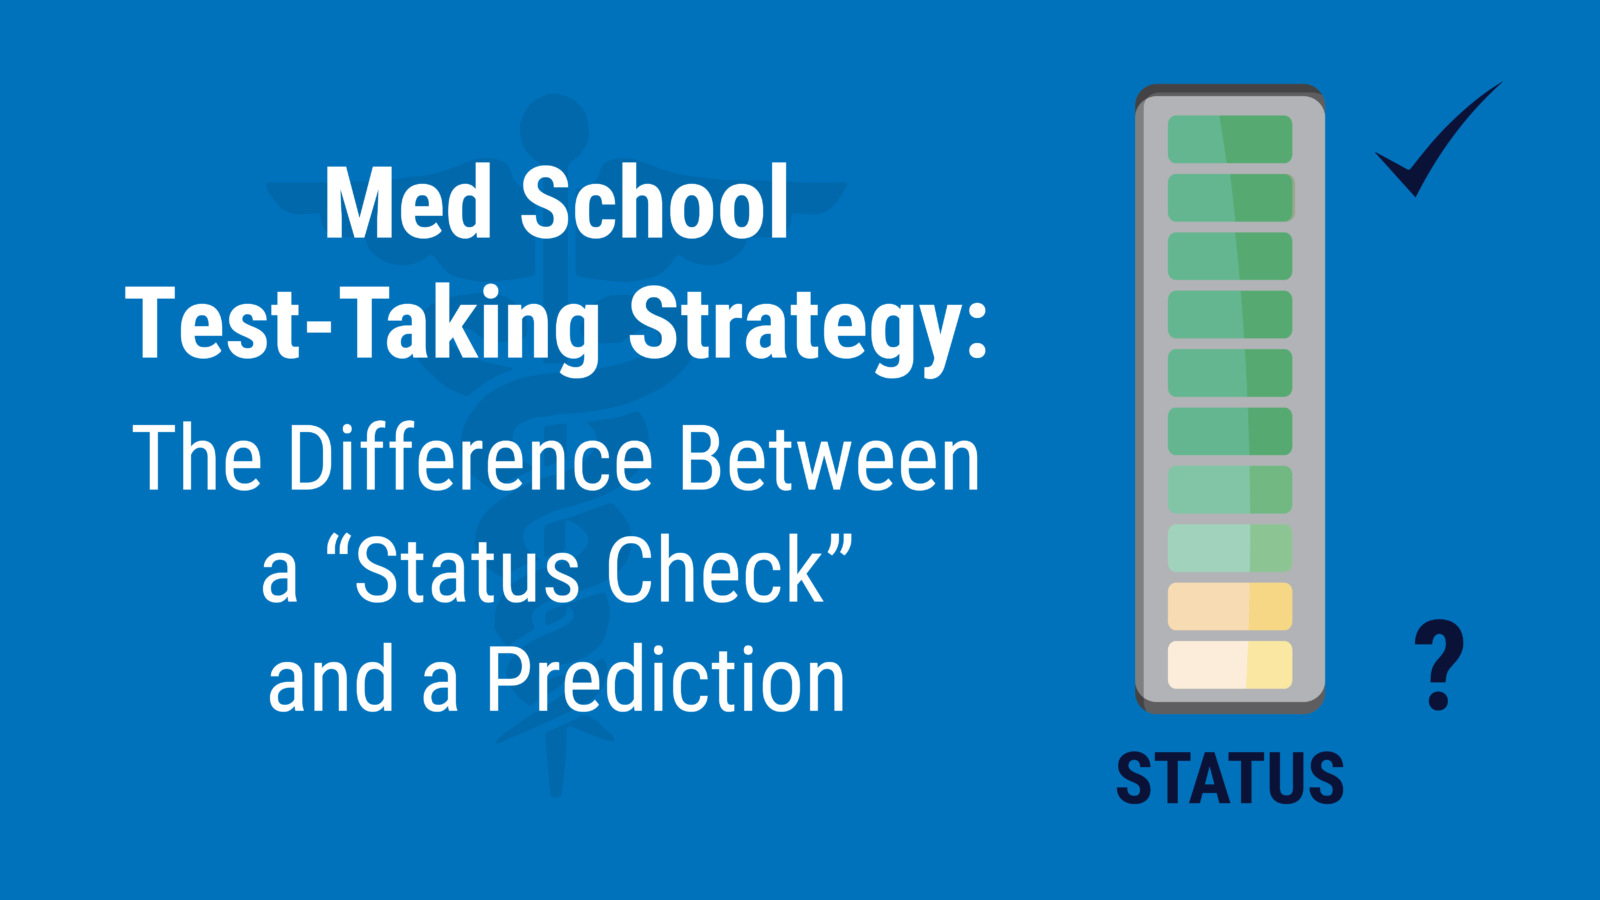 Med School Test-Taking Strategy: The Difference Between a “Status Check” and a Prediction